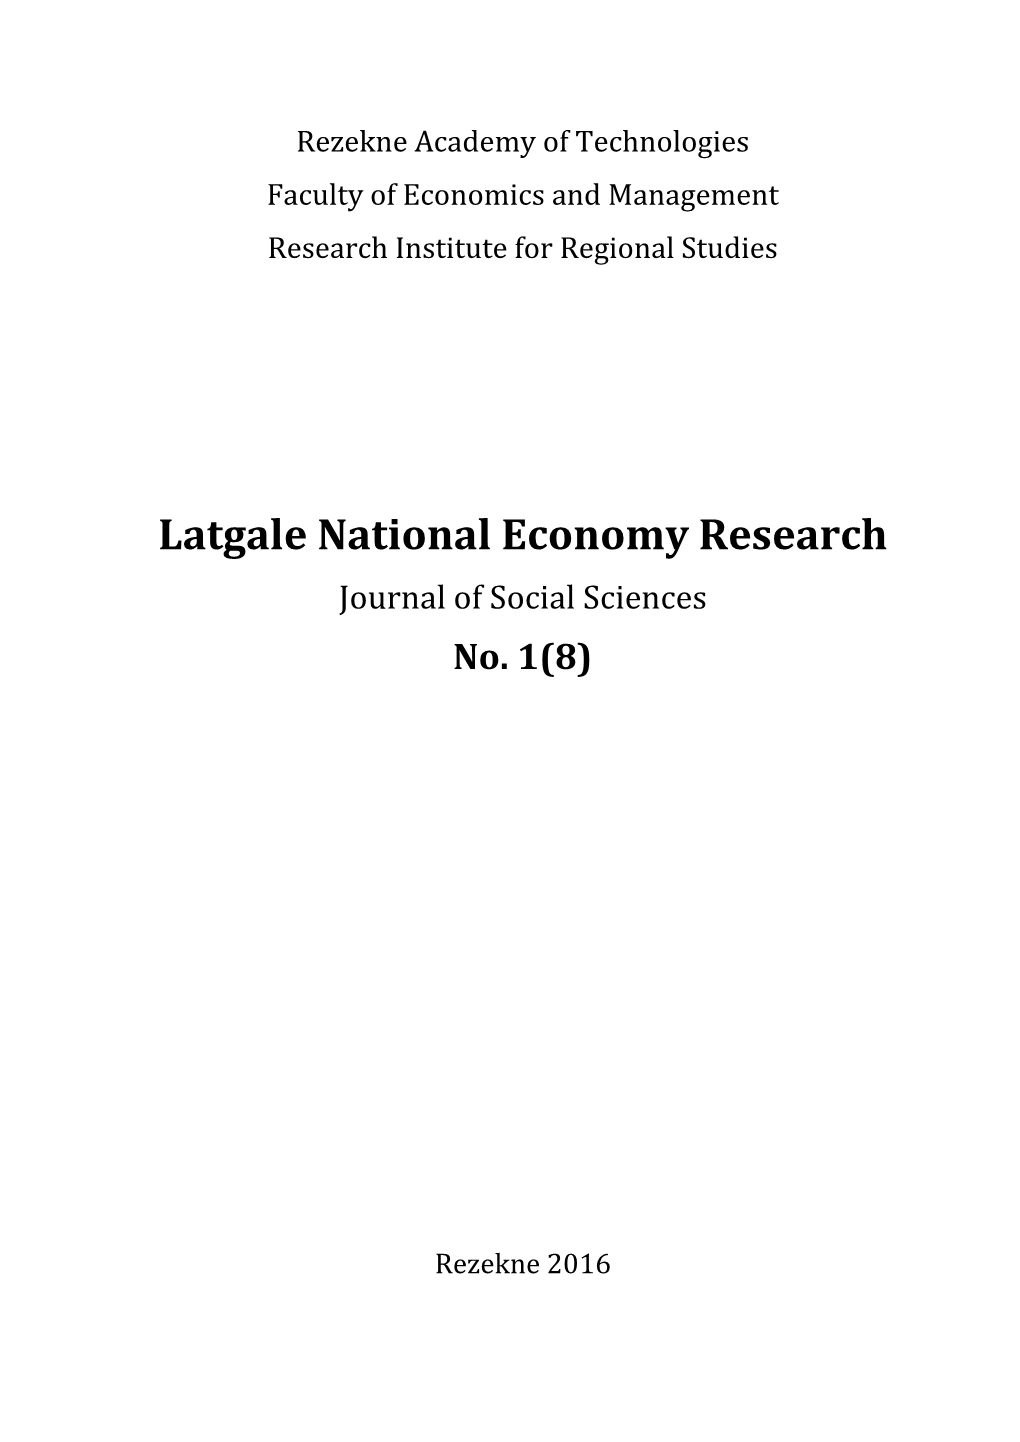 Latgale National Economy Research Journal of Social Sciences No